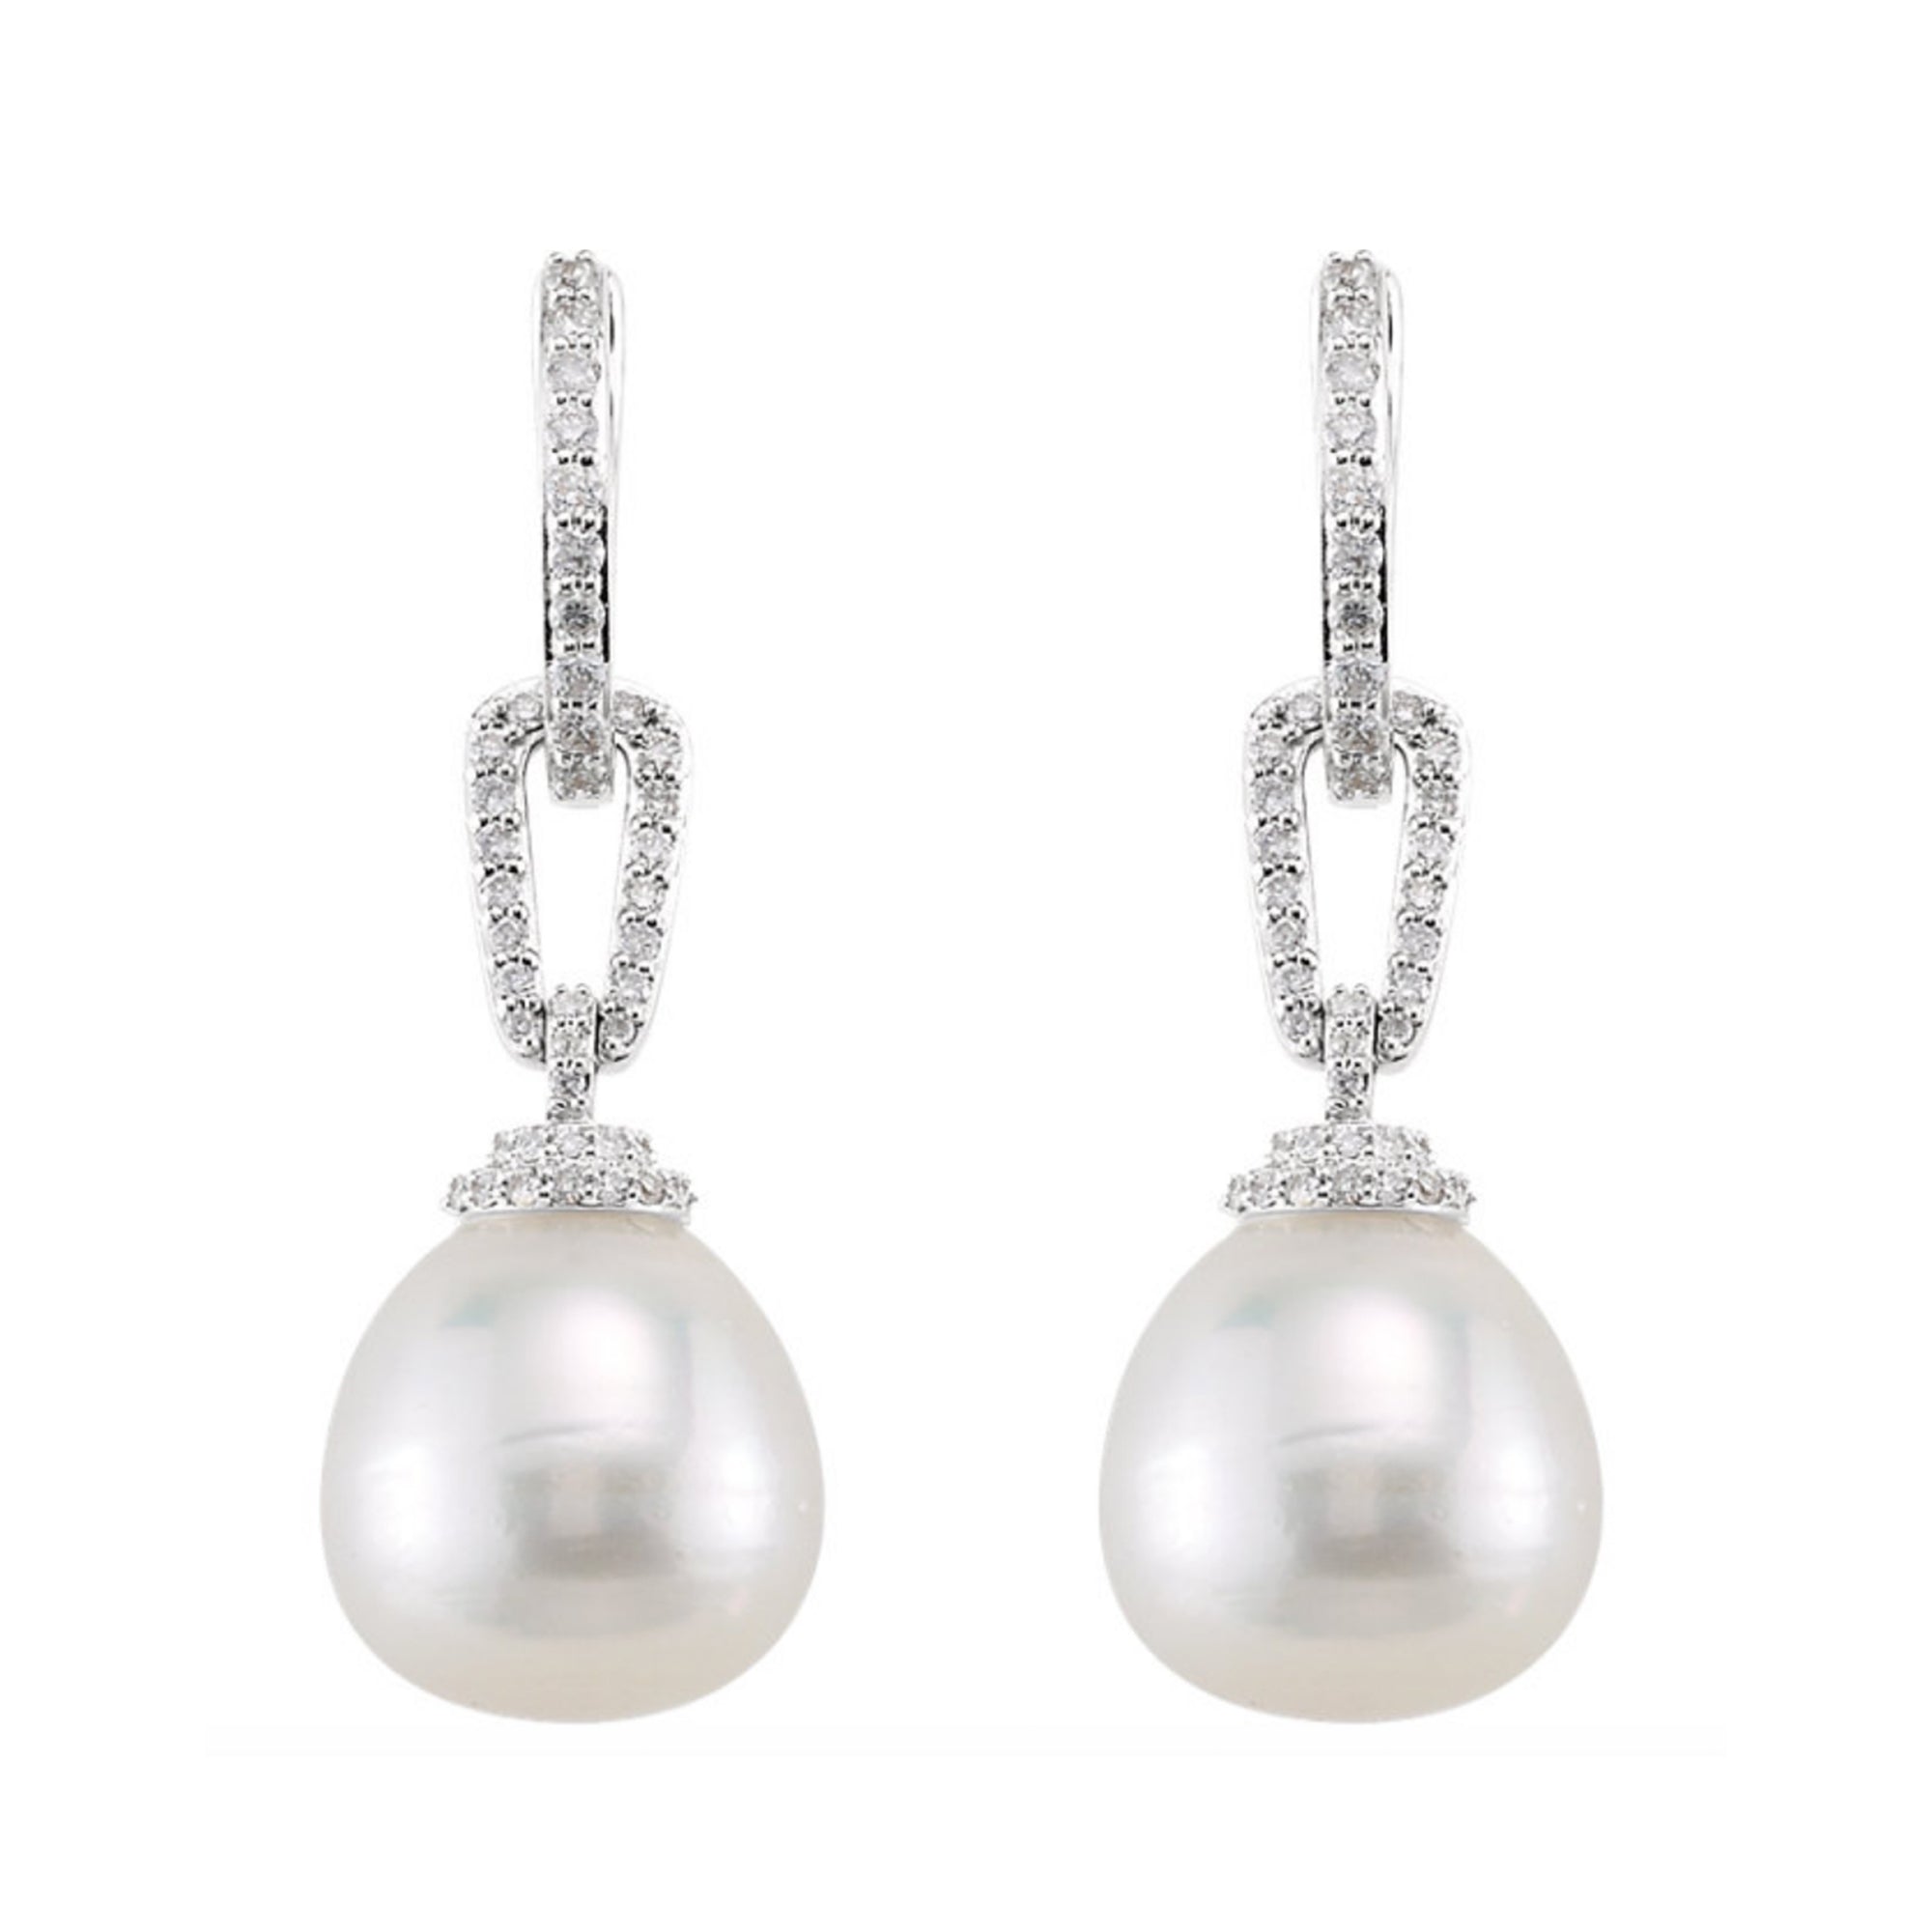 South Sea Pearl and Diamond Earrings - White Gold - Talisman Collection Fine Jewelers